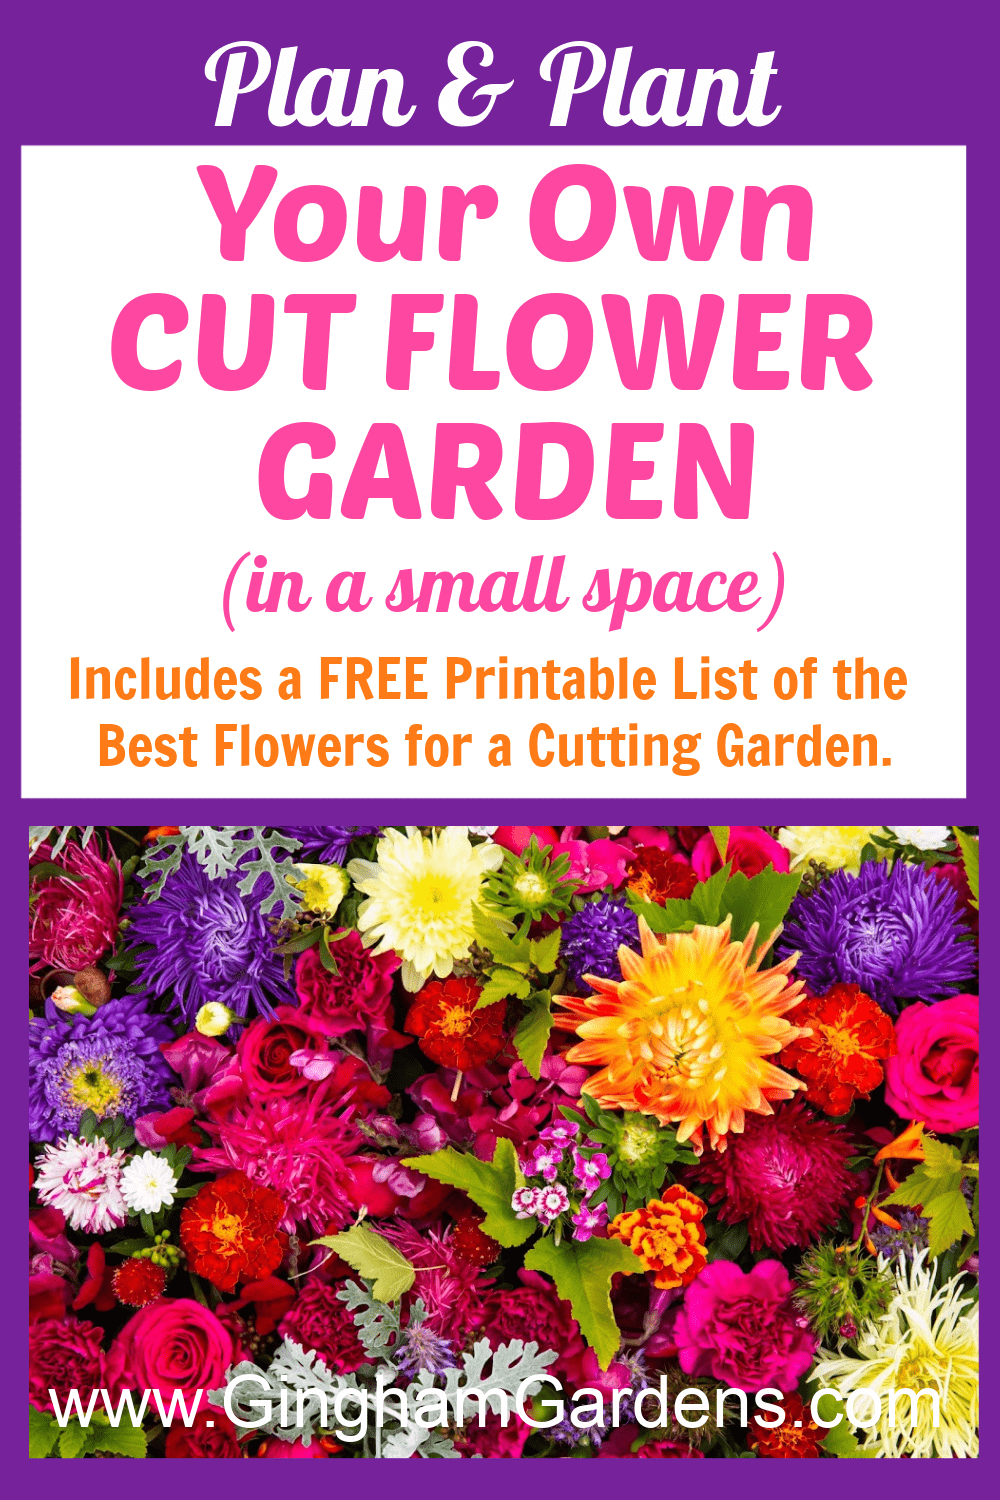 Image of Flowers with Text Overlay - Plan & Plant Your Own Cut Flower Garden